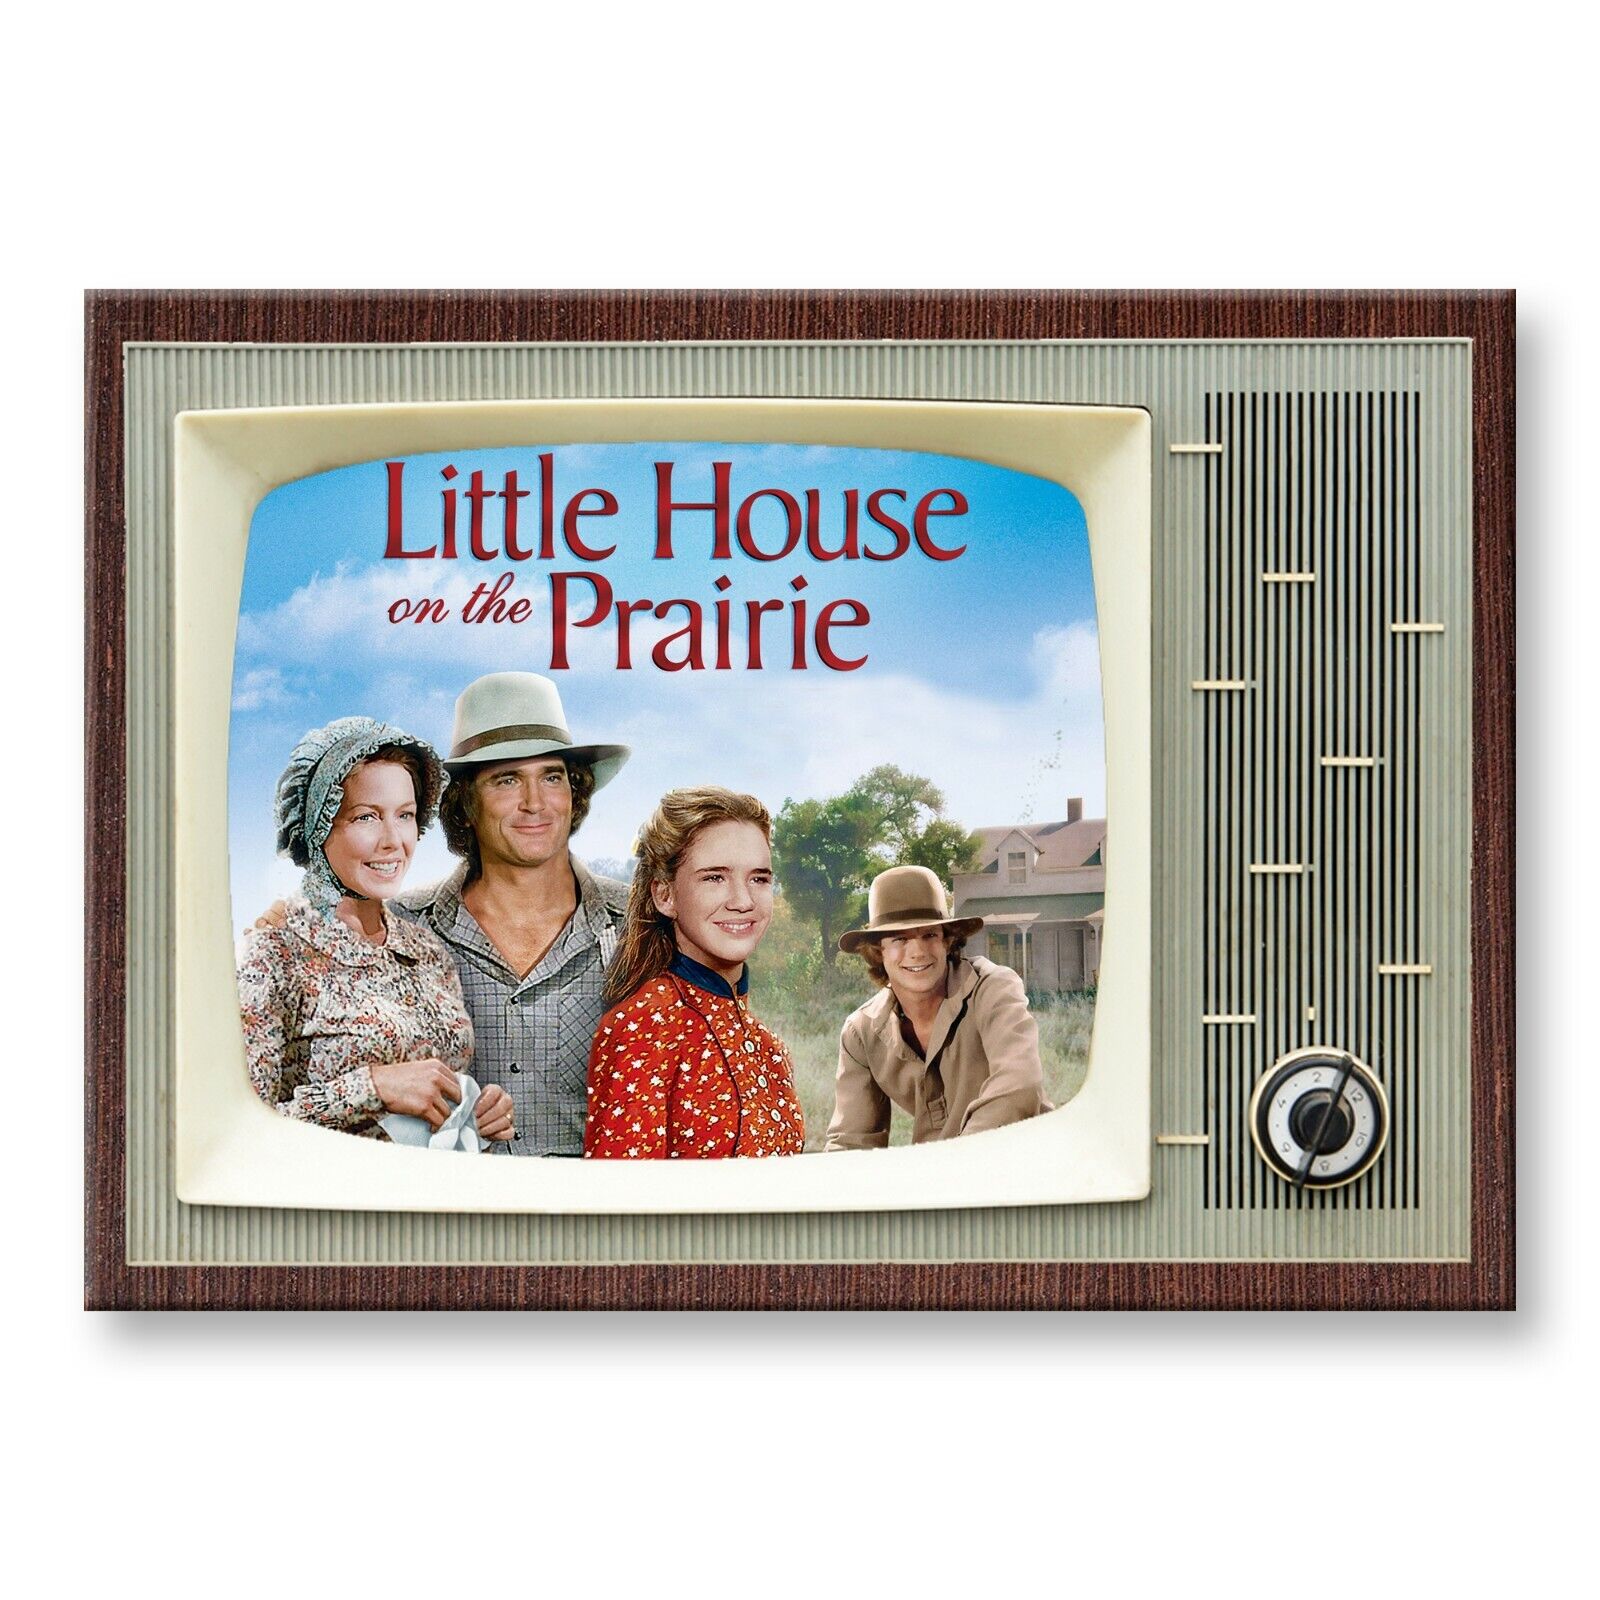 LITTLE HOUSE ON THE PRAIRIE TV Classic TV 3.5 inches x 2.5 inches FRIDGE MAGNET